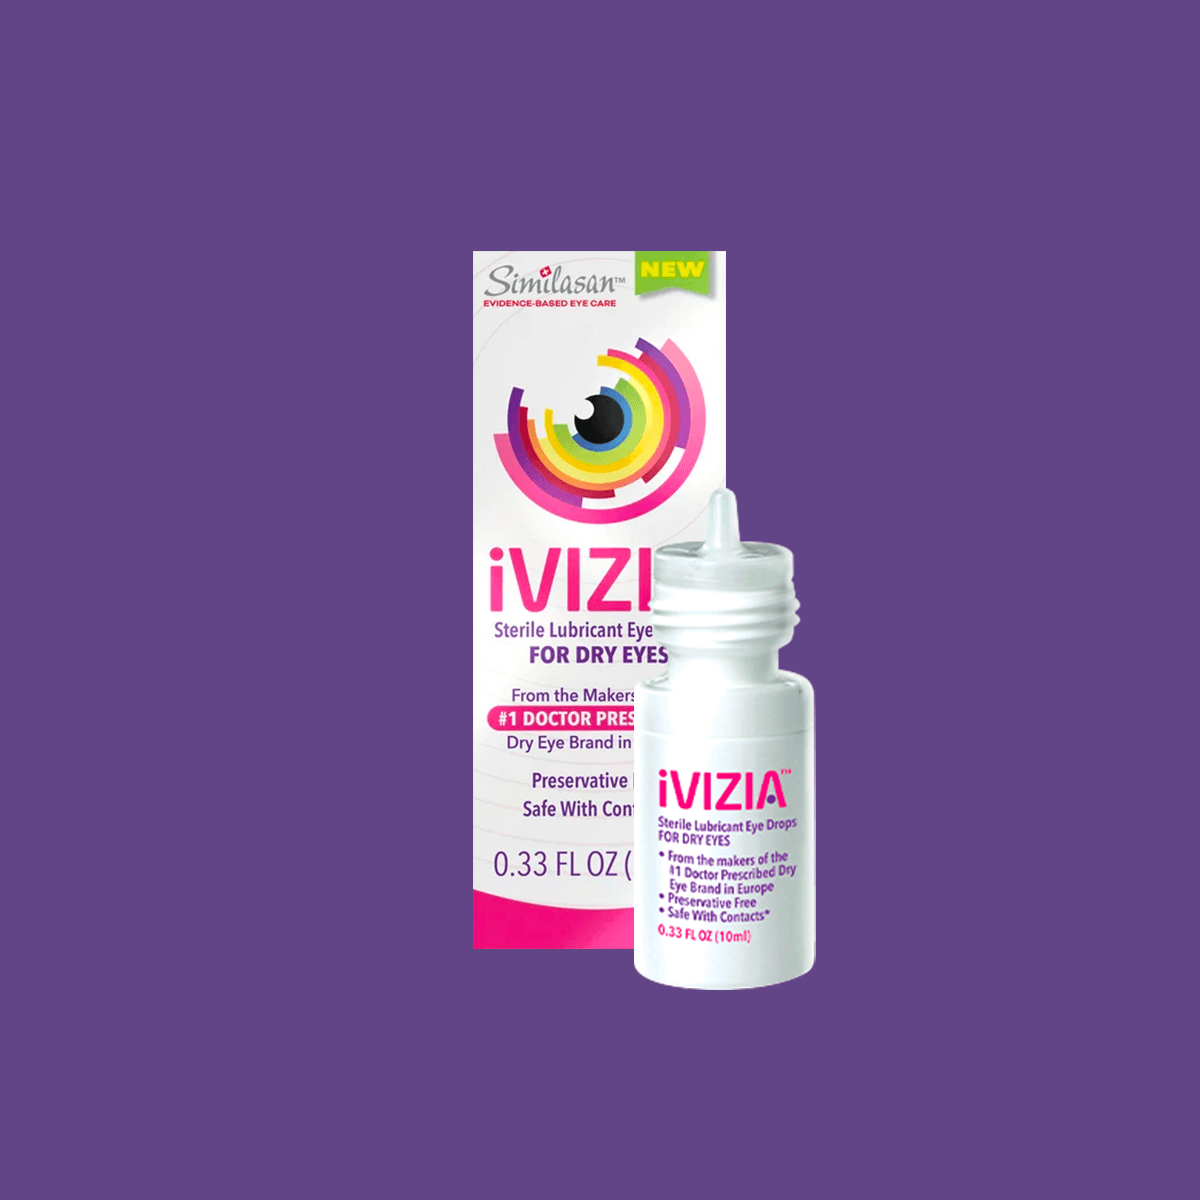 iVIZIA Sterile Lubricant Eye Drops for Dry Eyes, Preservative-Free, Dry Eye Relief, Contact Lens Friendly, 0.33 fl oz (10ml bottle) - DryEye Rescue Store